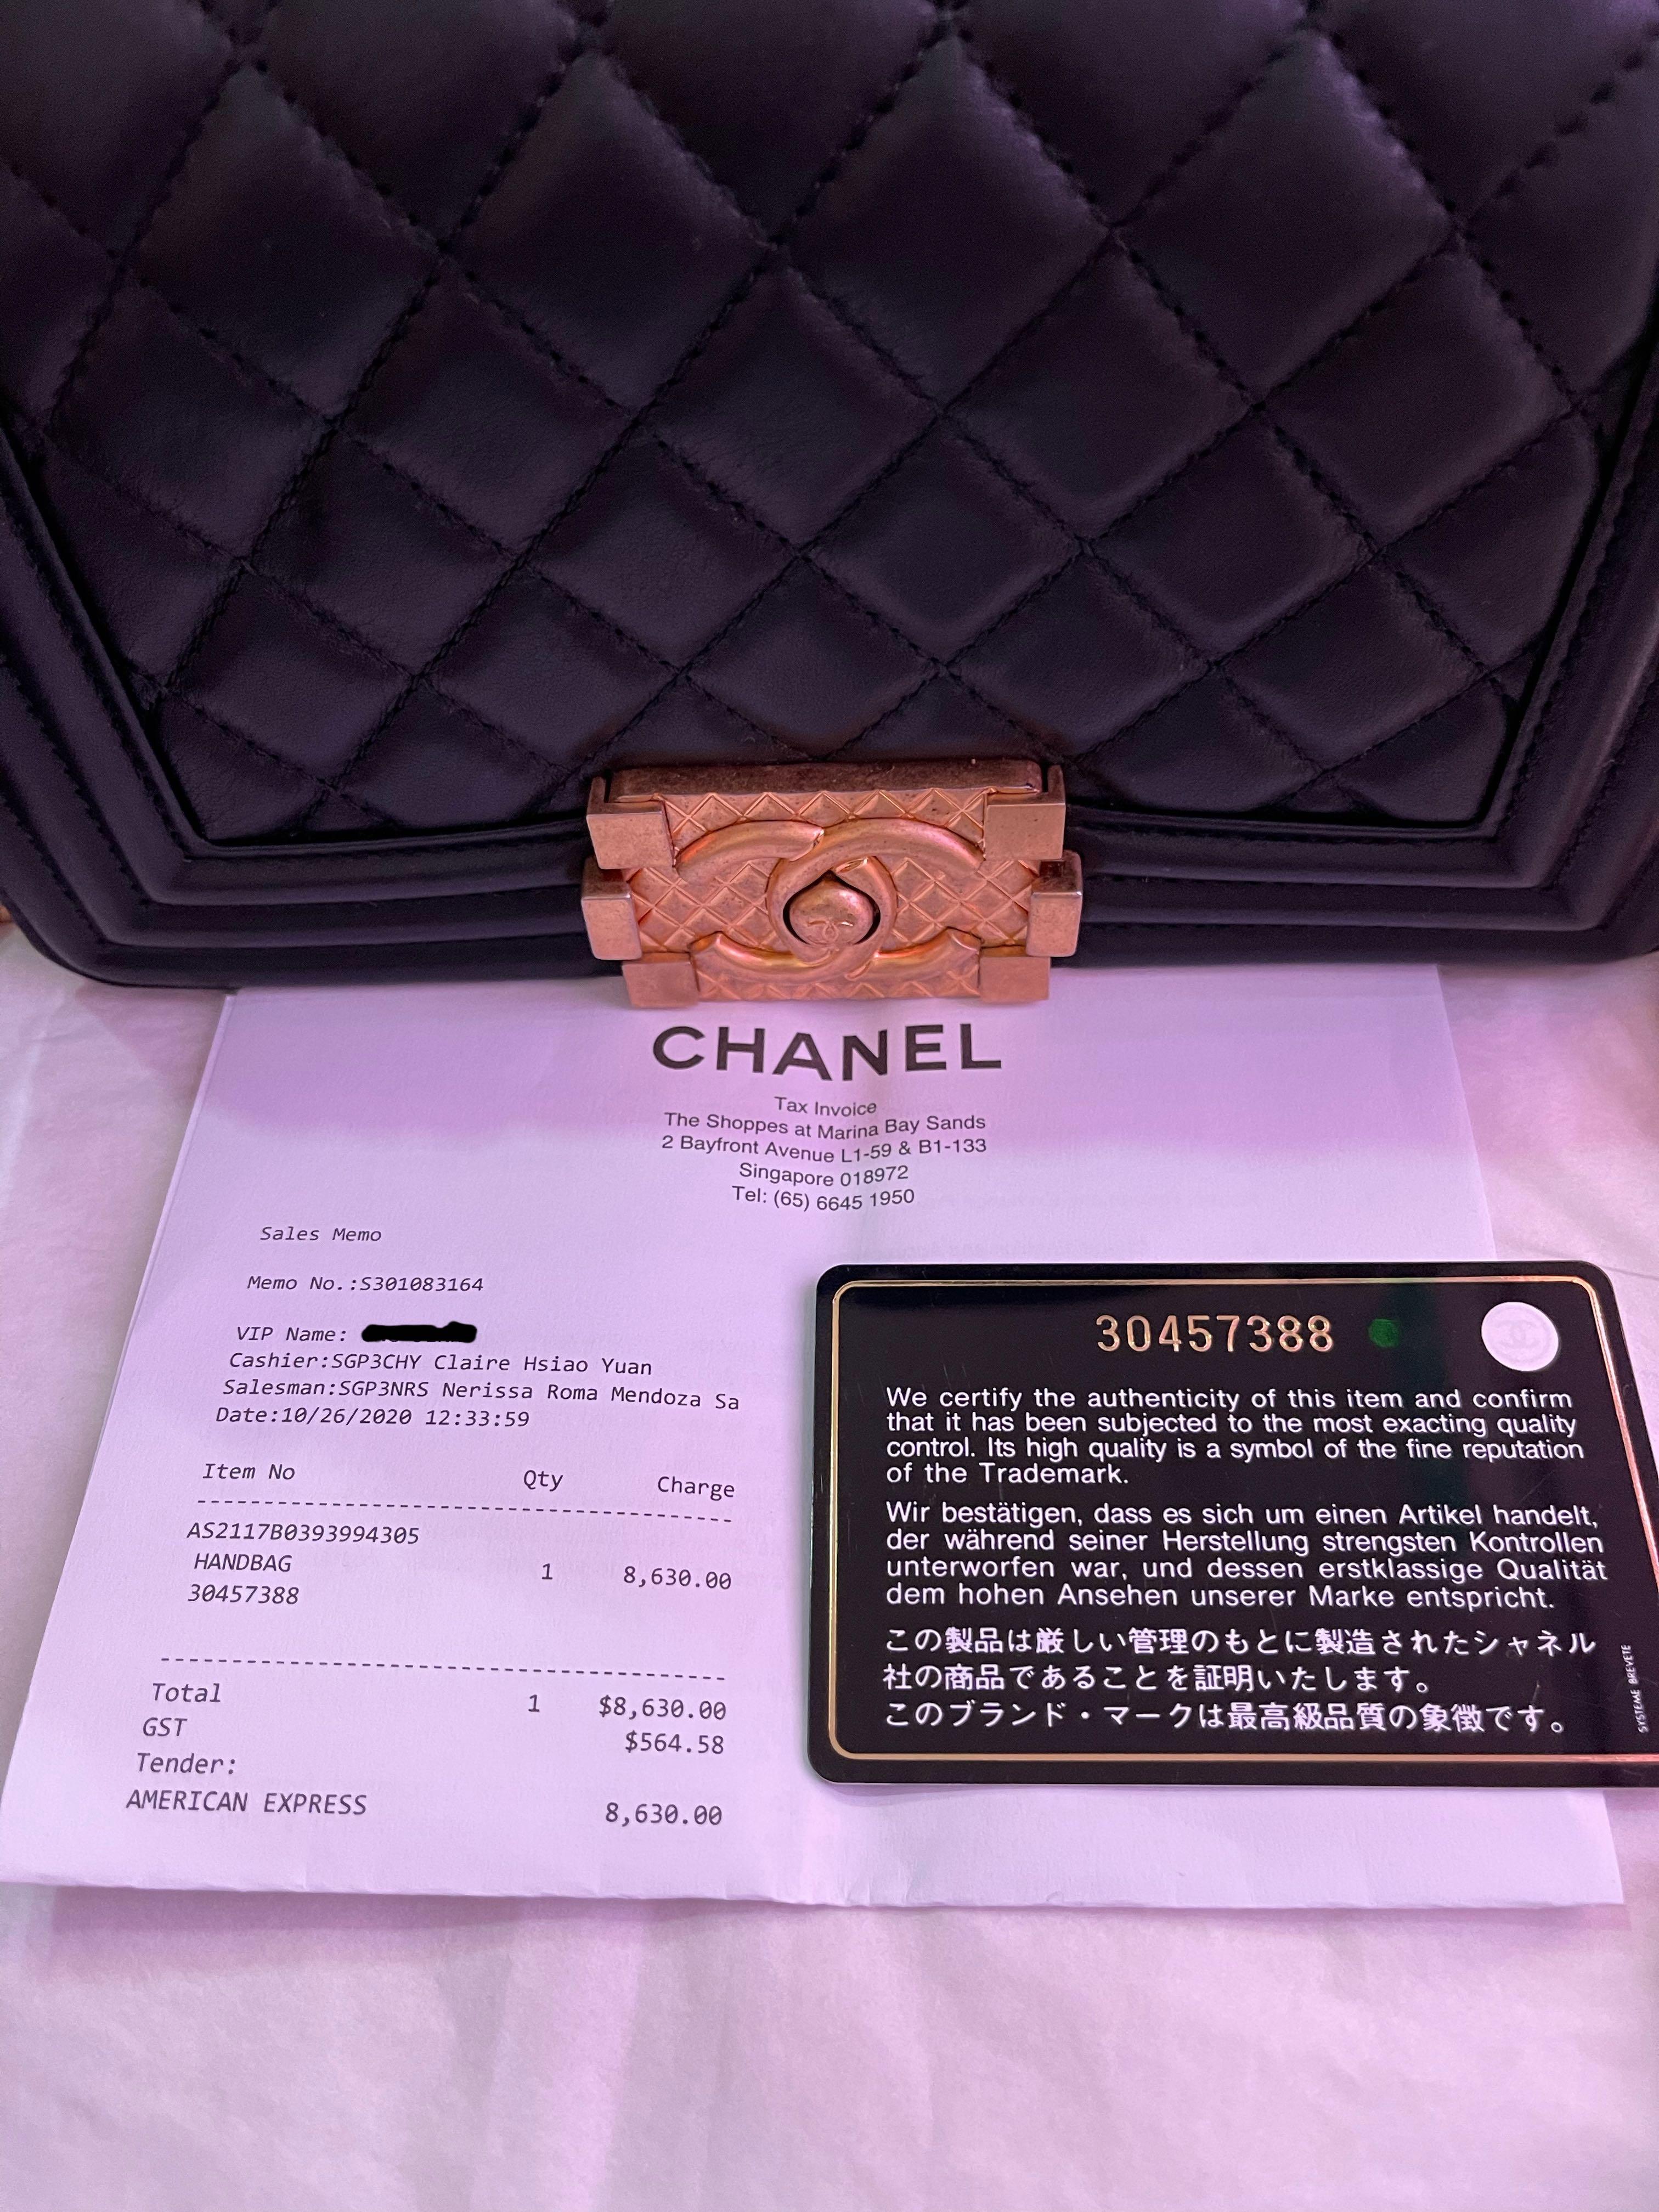 These New Chanel Flap Bags Come With A Wooden Handle - BAGAHOLICBOY